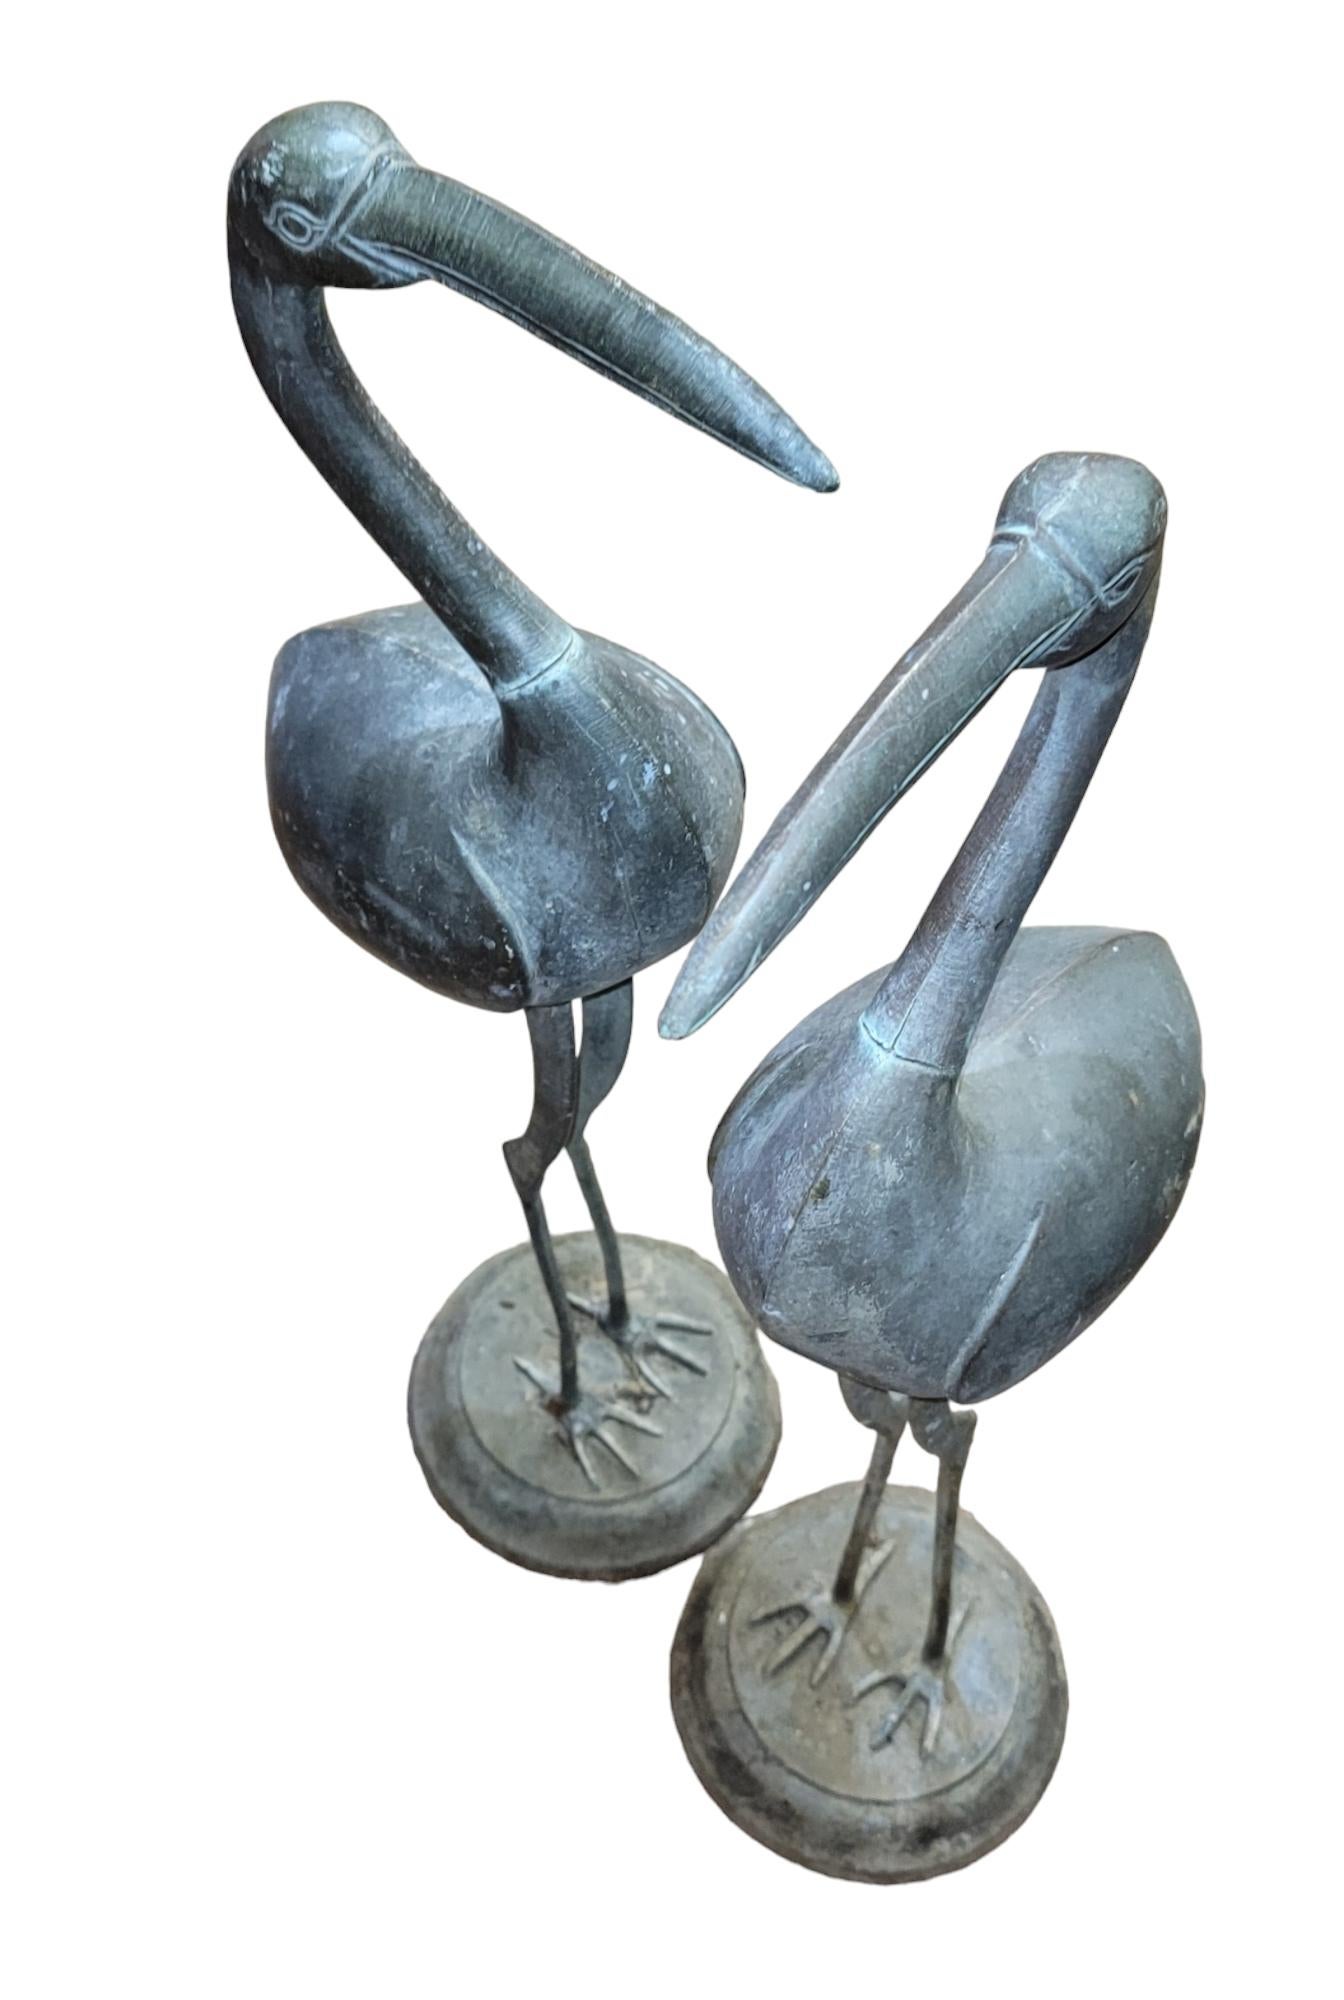 Large life sized pair of crane garden statues standing straight up in the stance of attention. The base is circulars and holds the cranes in place and balanced. measures approx - 30h x 5w  x 10d
